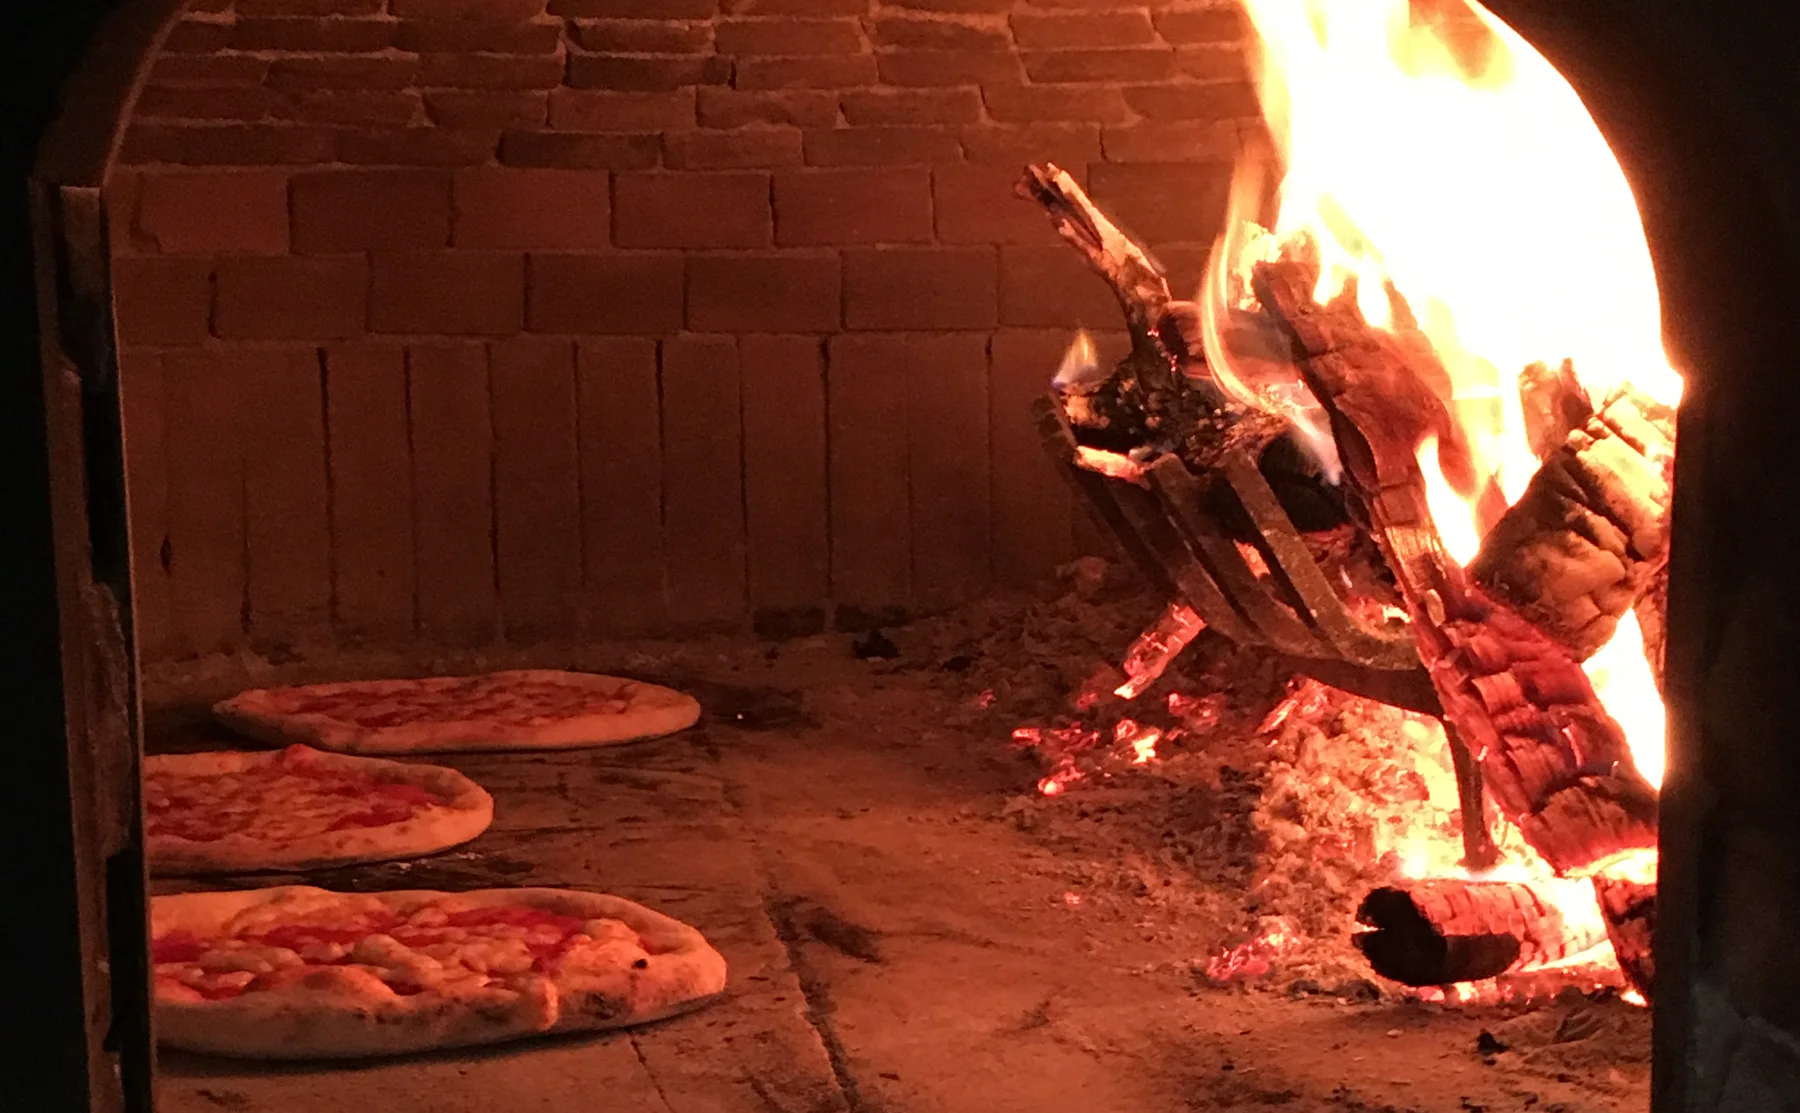 Wood-fired Pizza in Italian home - 1000260